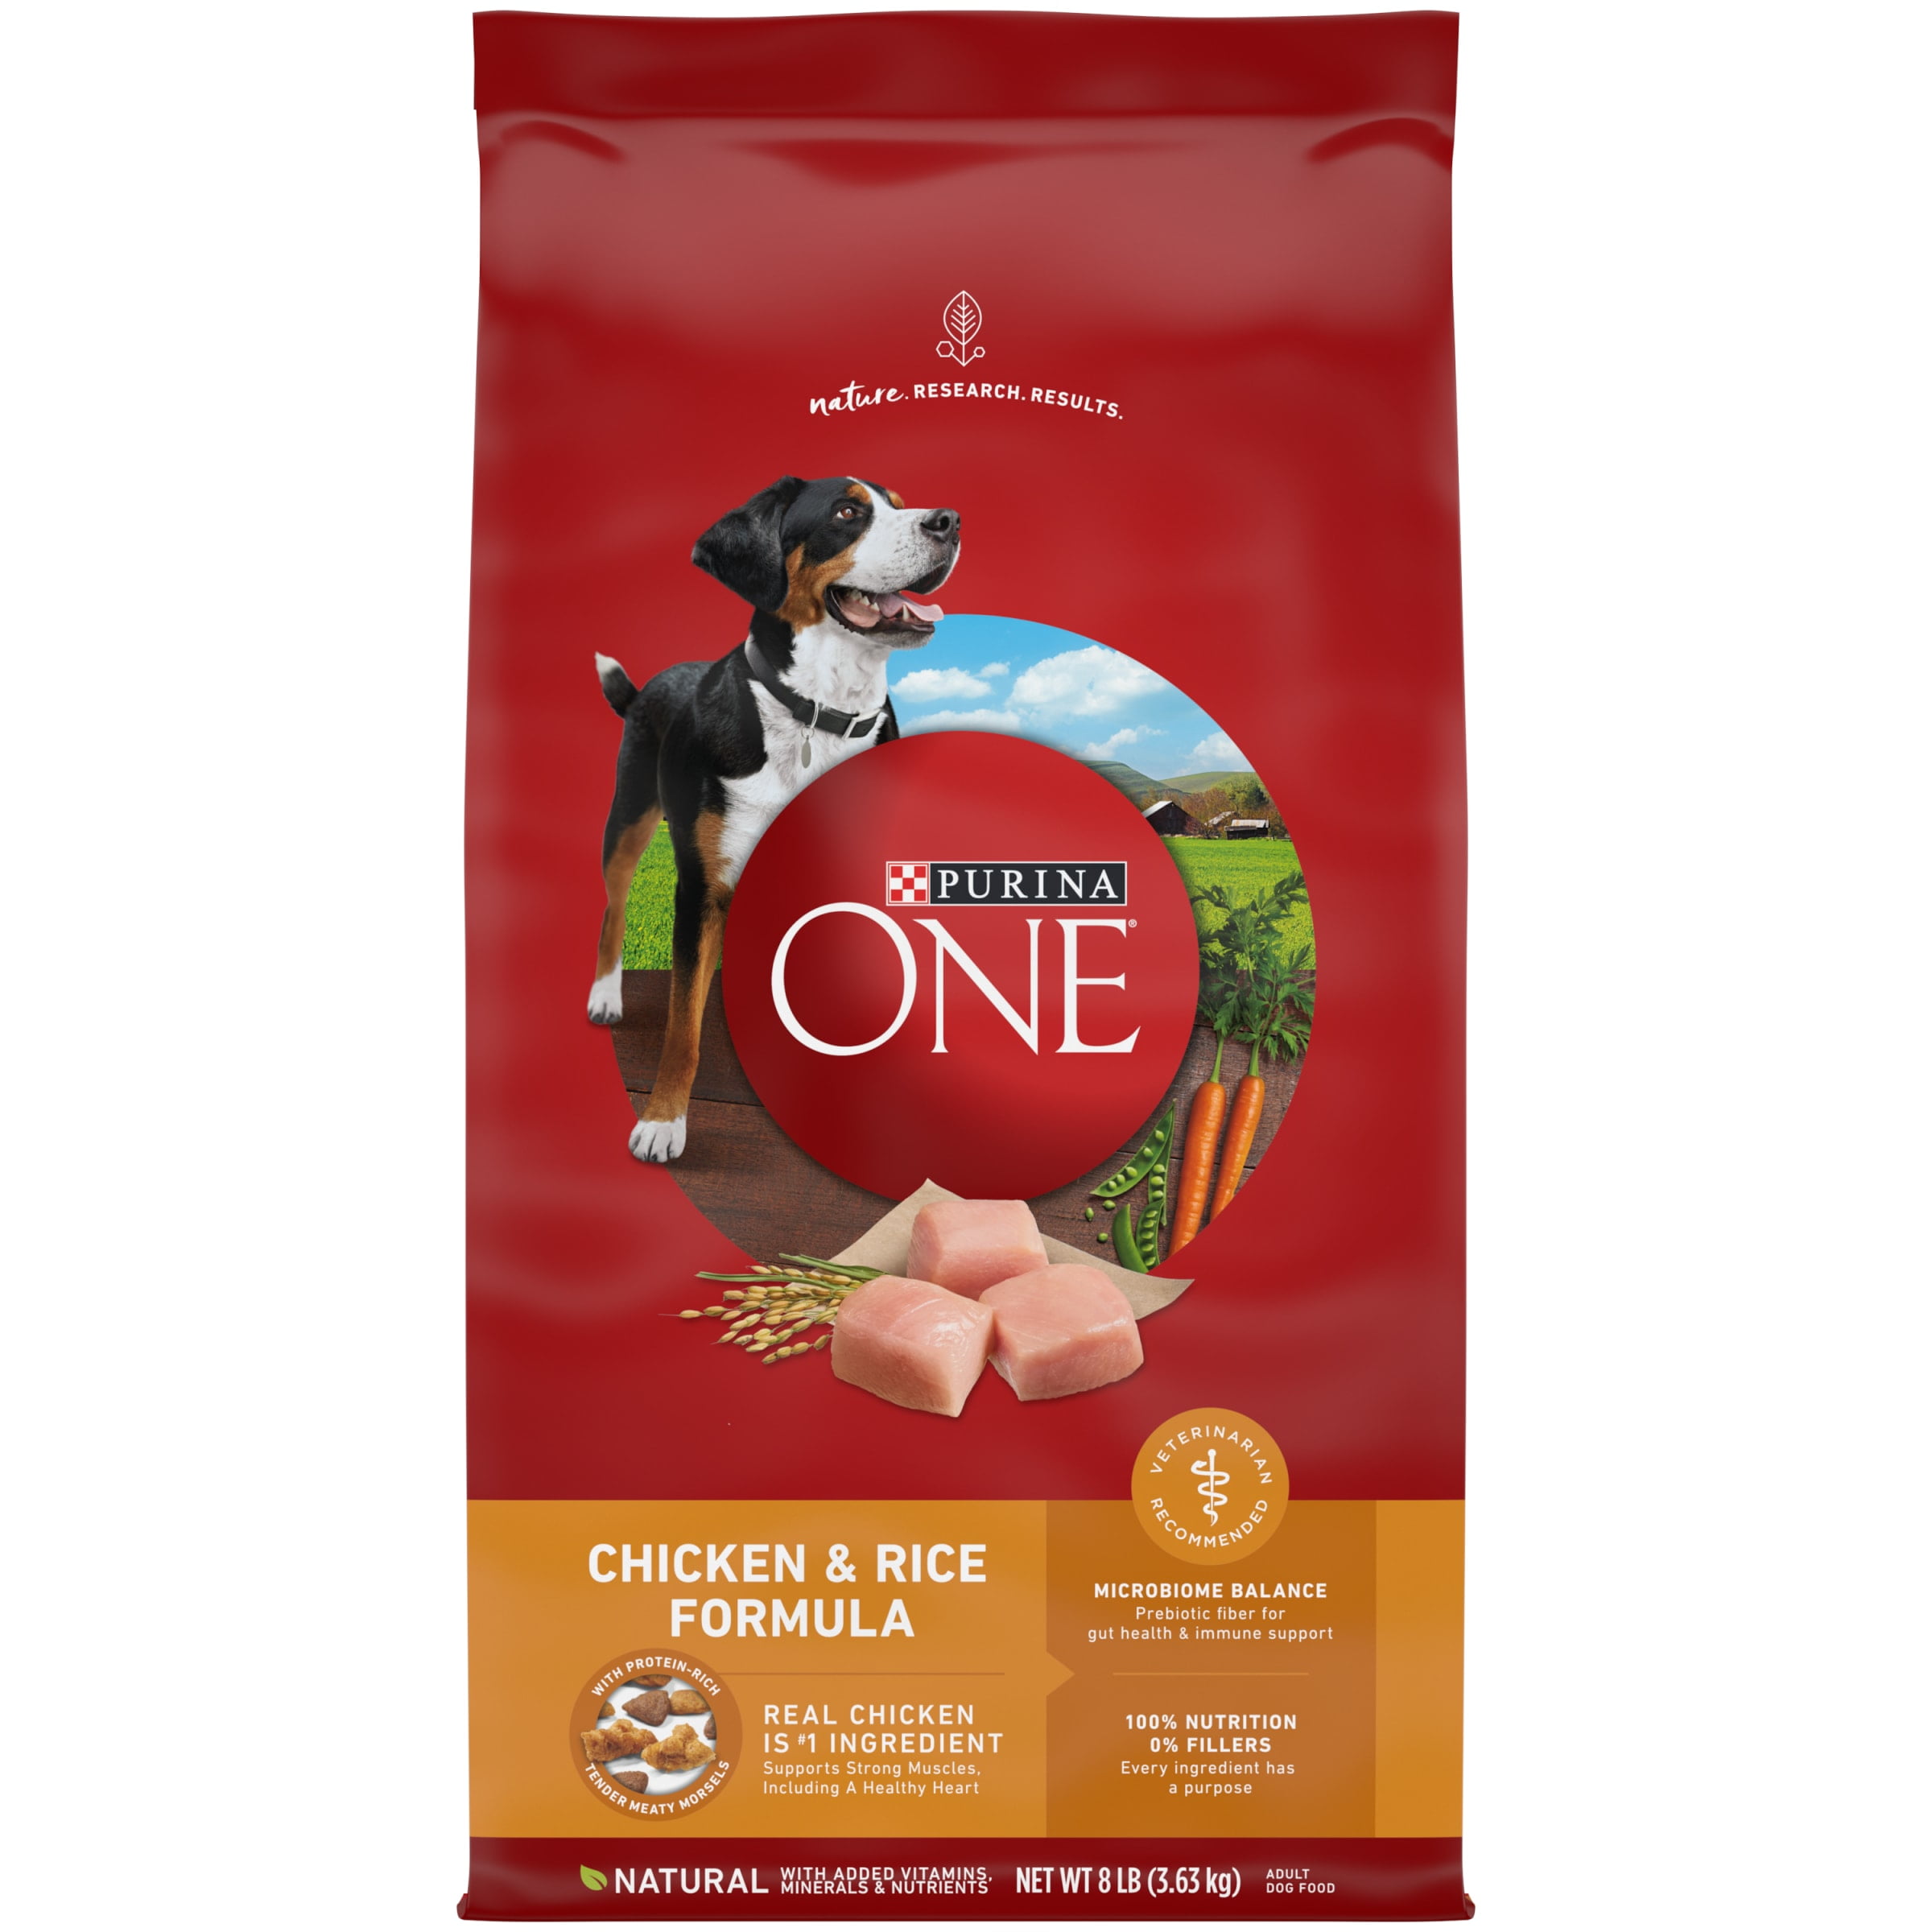 Purina One Dry Dog Food for Adult Dogs Chicken and Rice Formula, 8 lb Bag